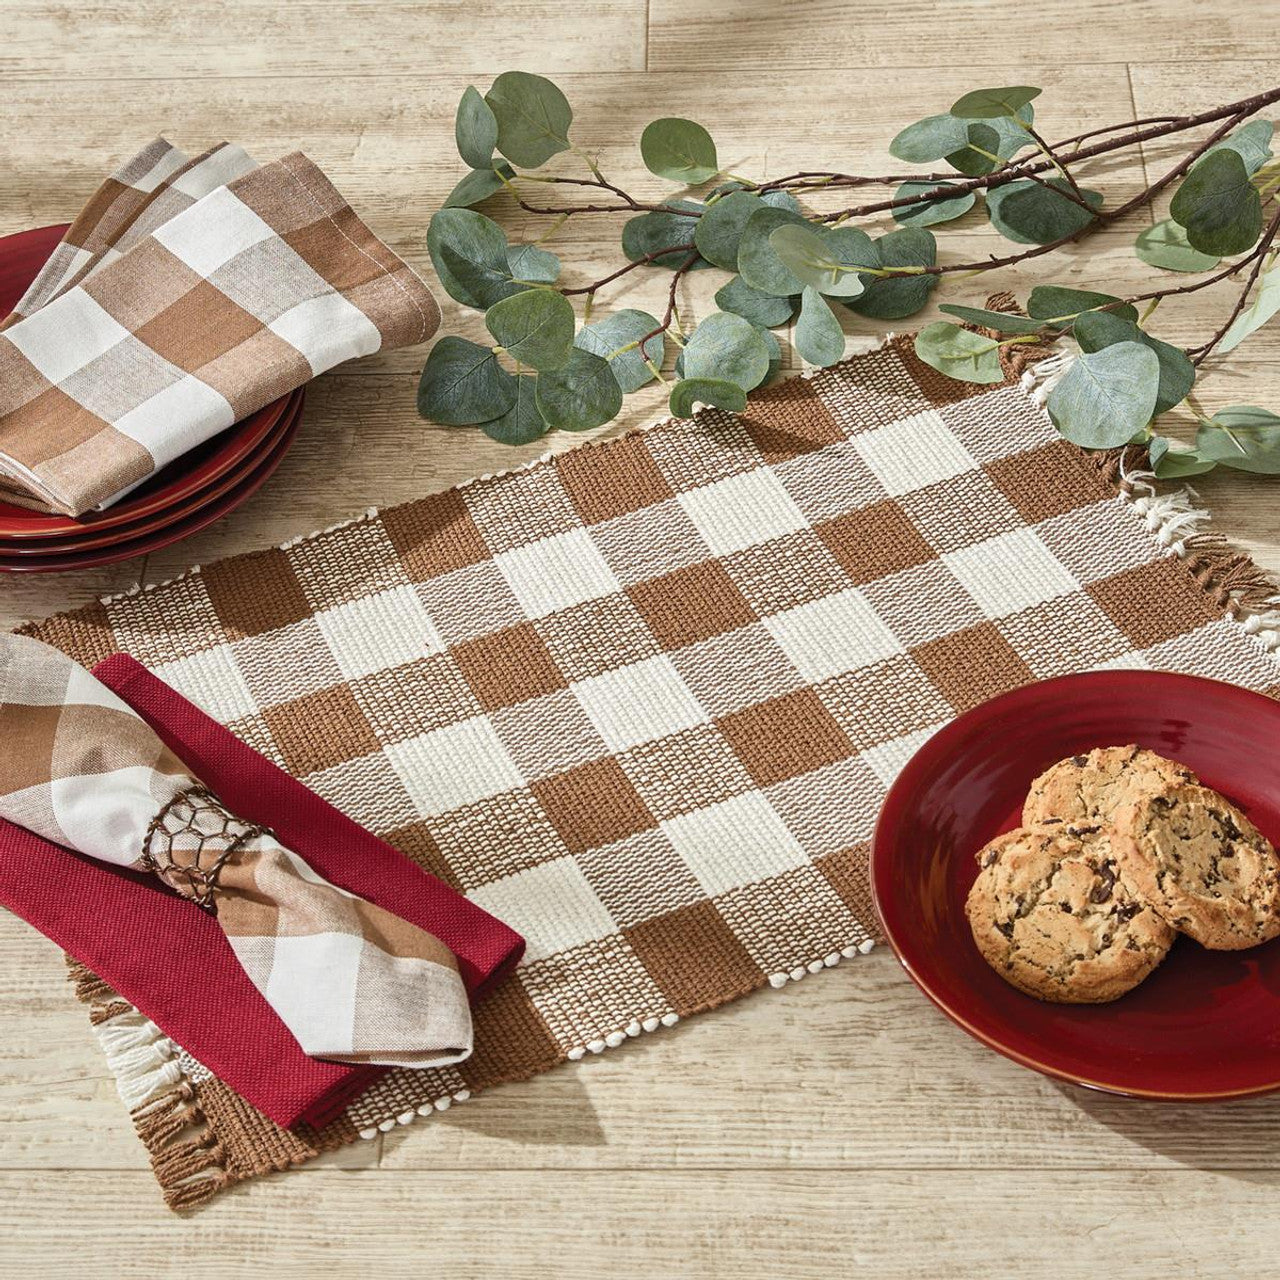 Wicklow Check Brown & Cream Placemats - Set of 12 Park Designs